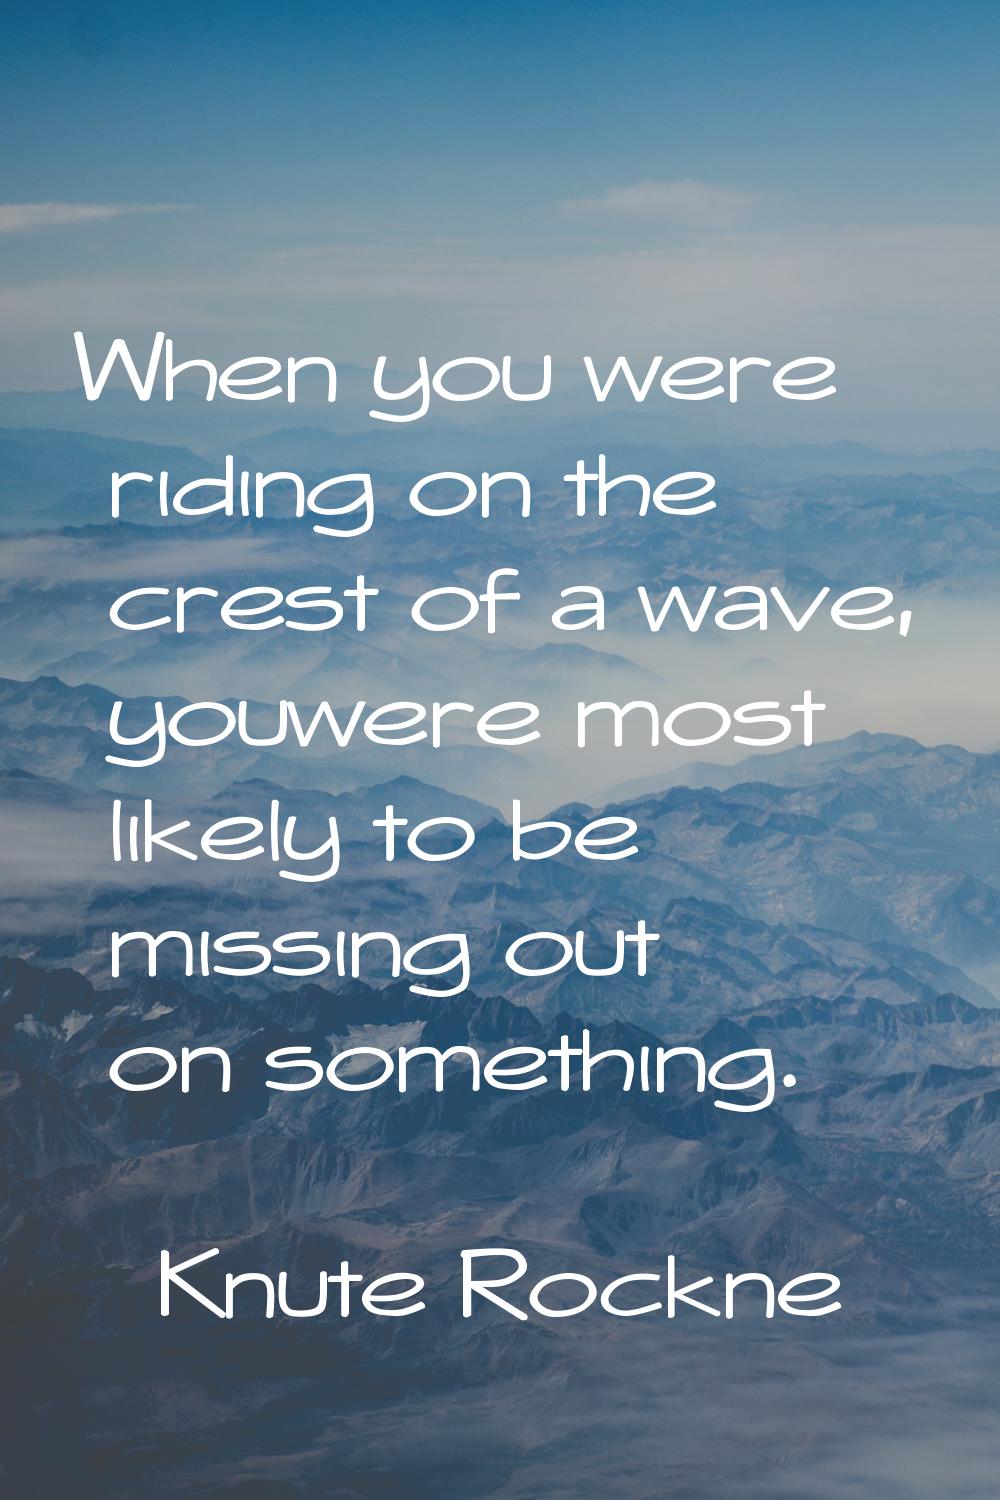 When you were riding on the crest of a wave, youwere most likely to be missing out on something.